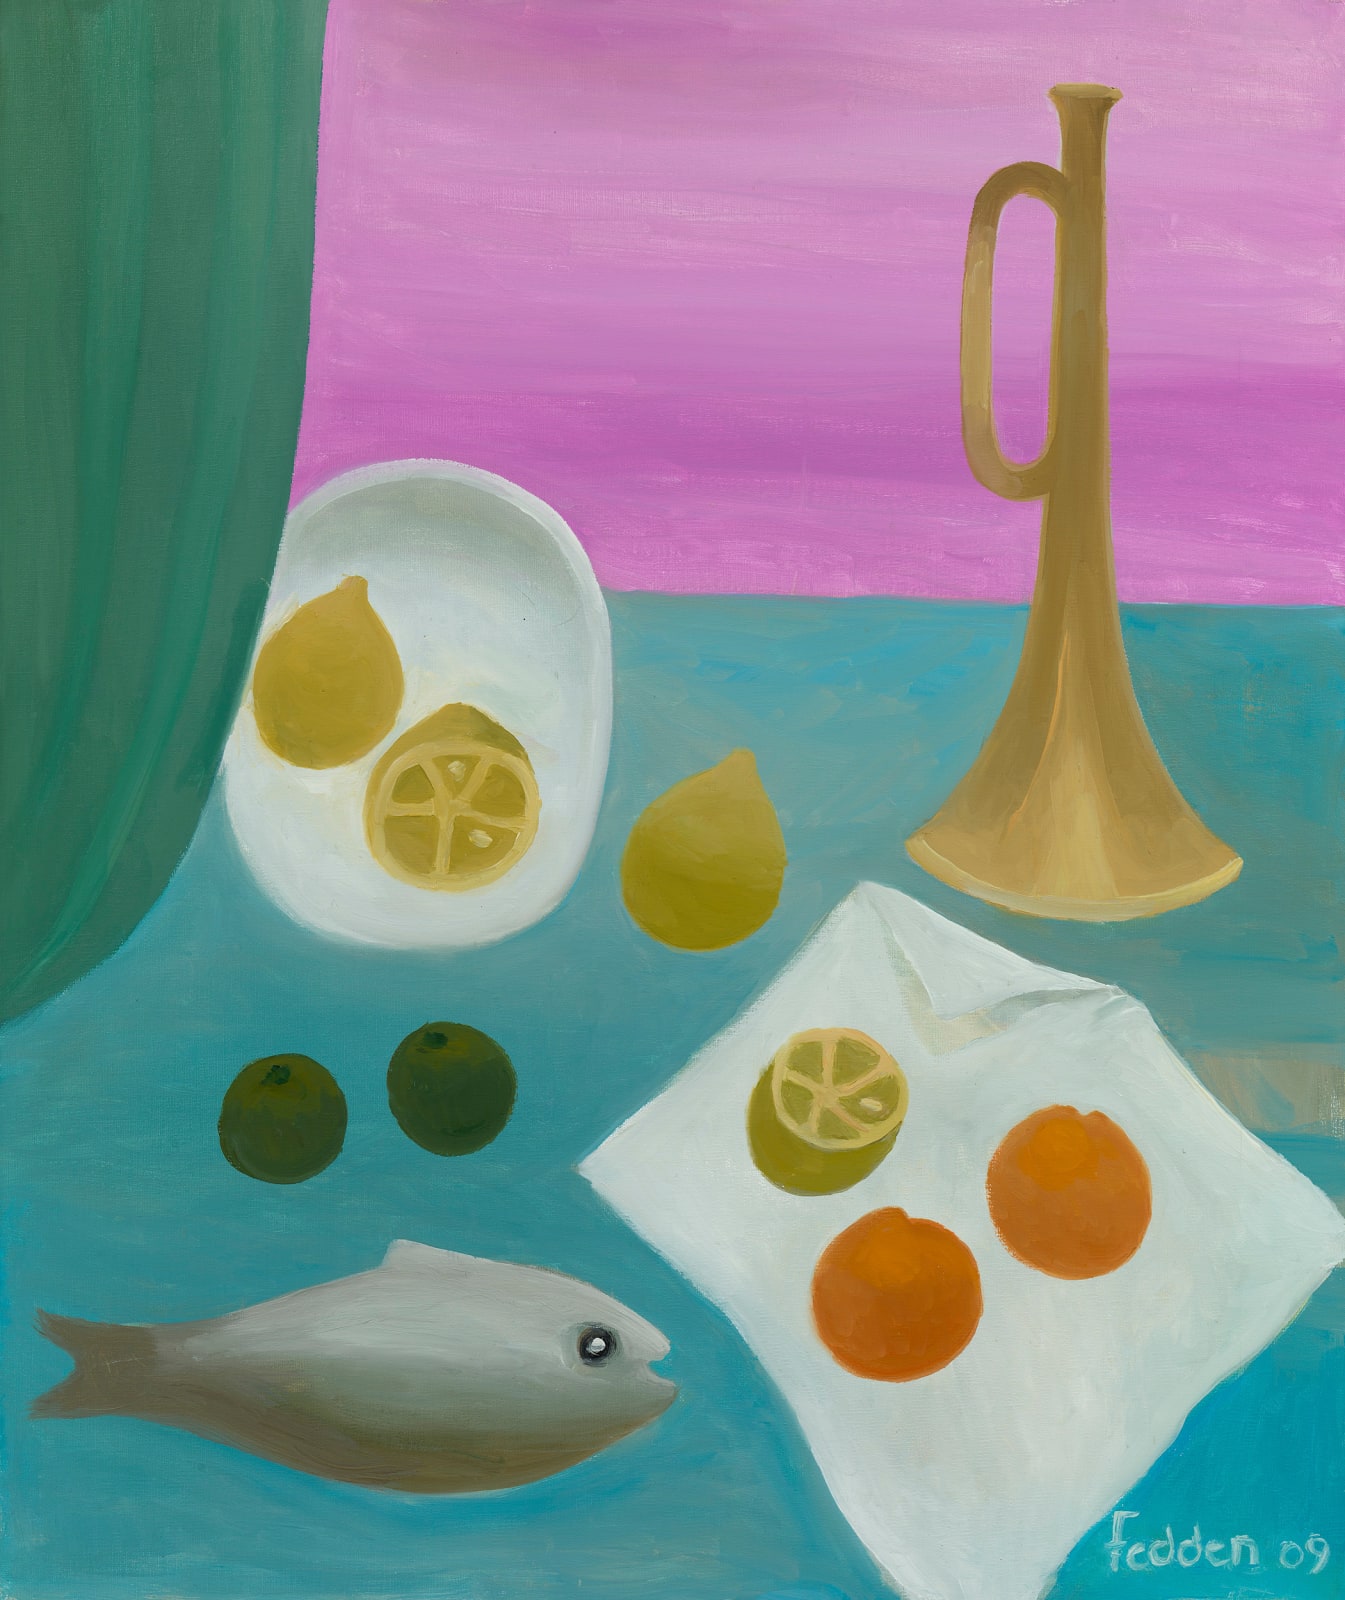 Mary Fedden, Fish and trumpet, 2009